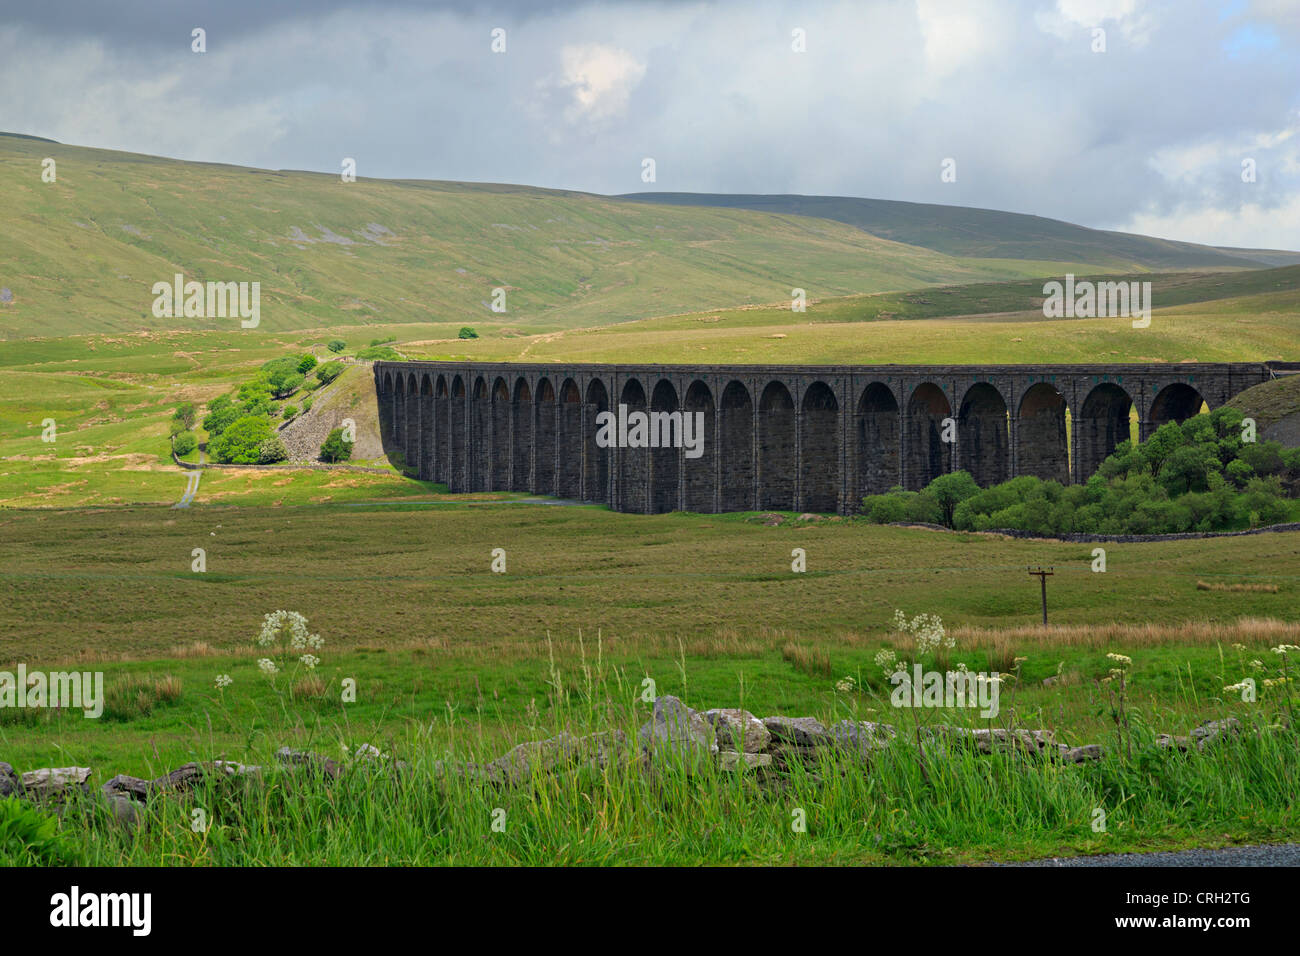 Ribblehead Viaduct, North Yorkshire. The 440 yard railway viaduct was built in 1870. Stock Photo